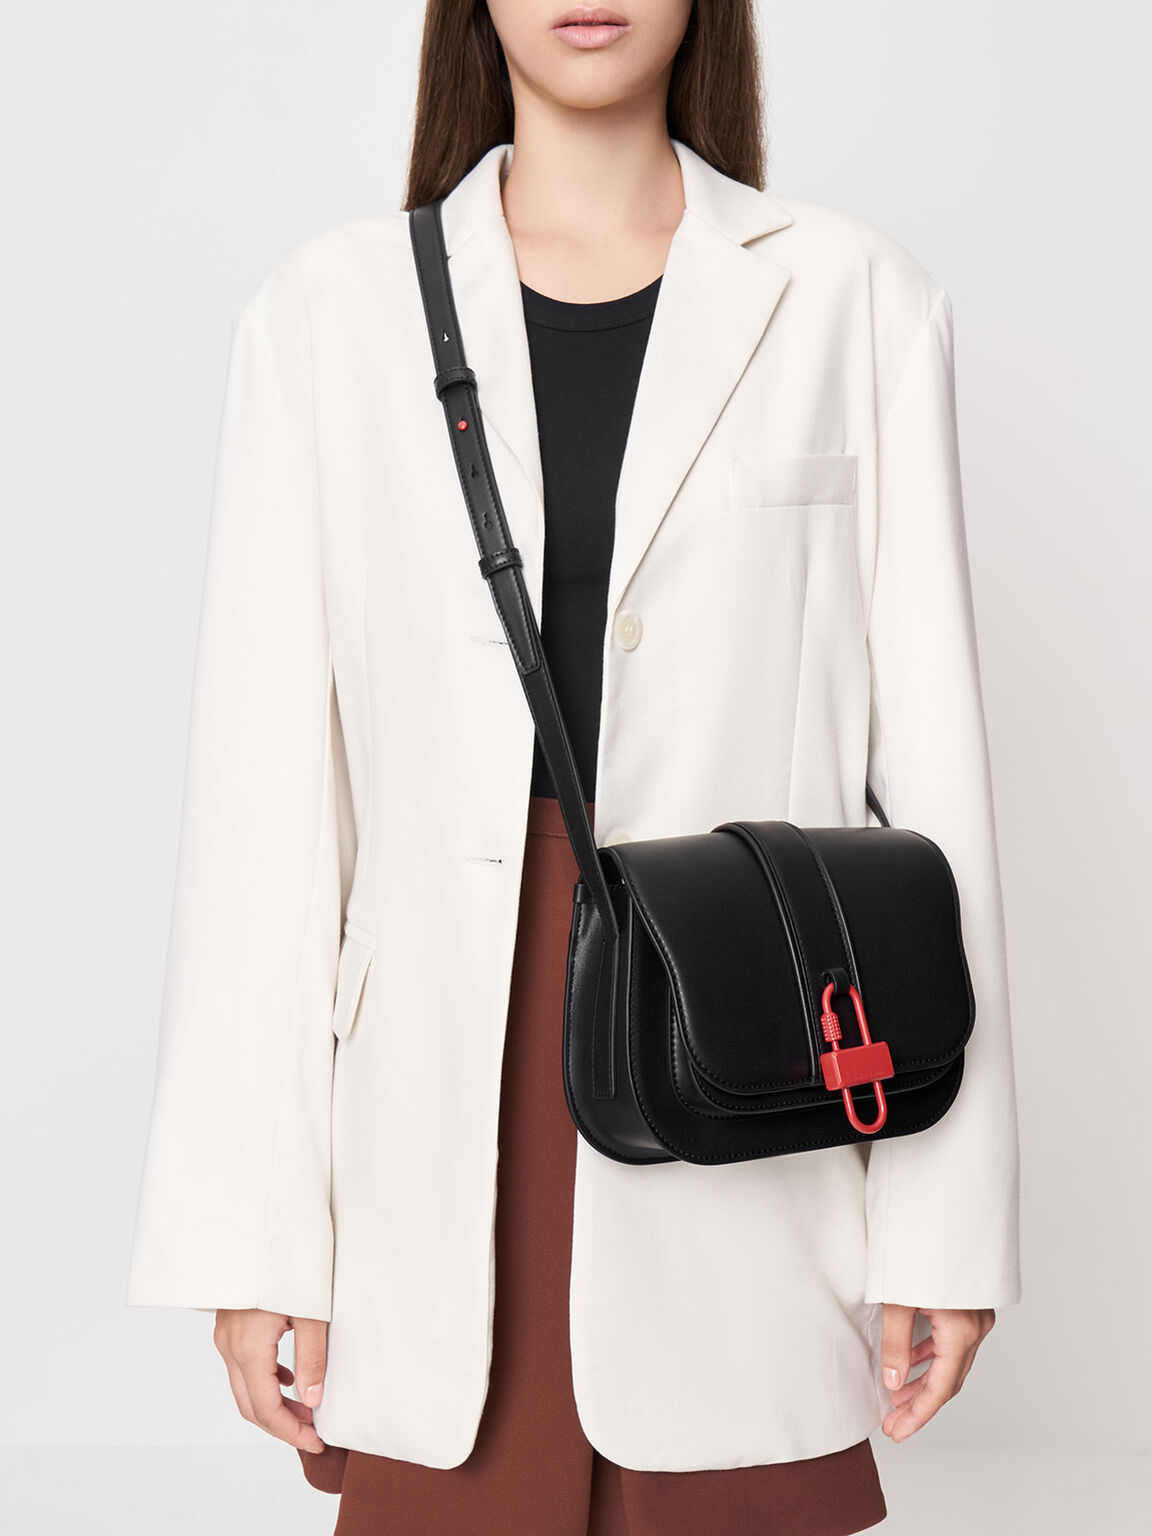 Women's Crossbody Bags | Exclusive Styles - CHARLES & KEITH NL